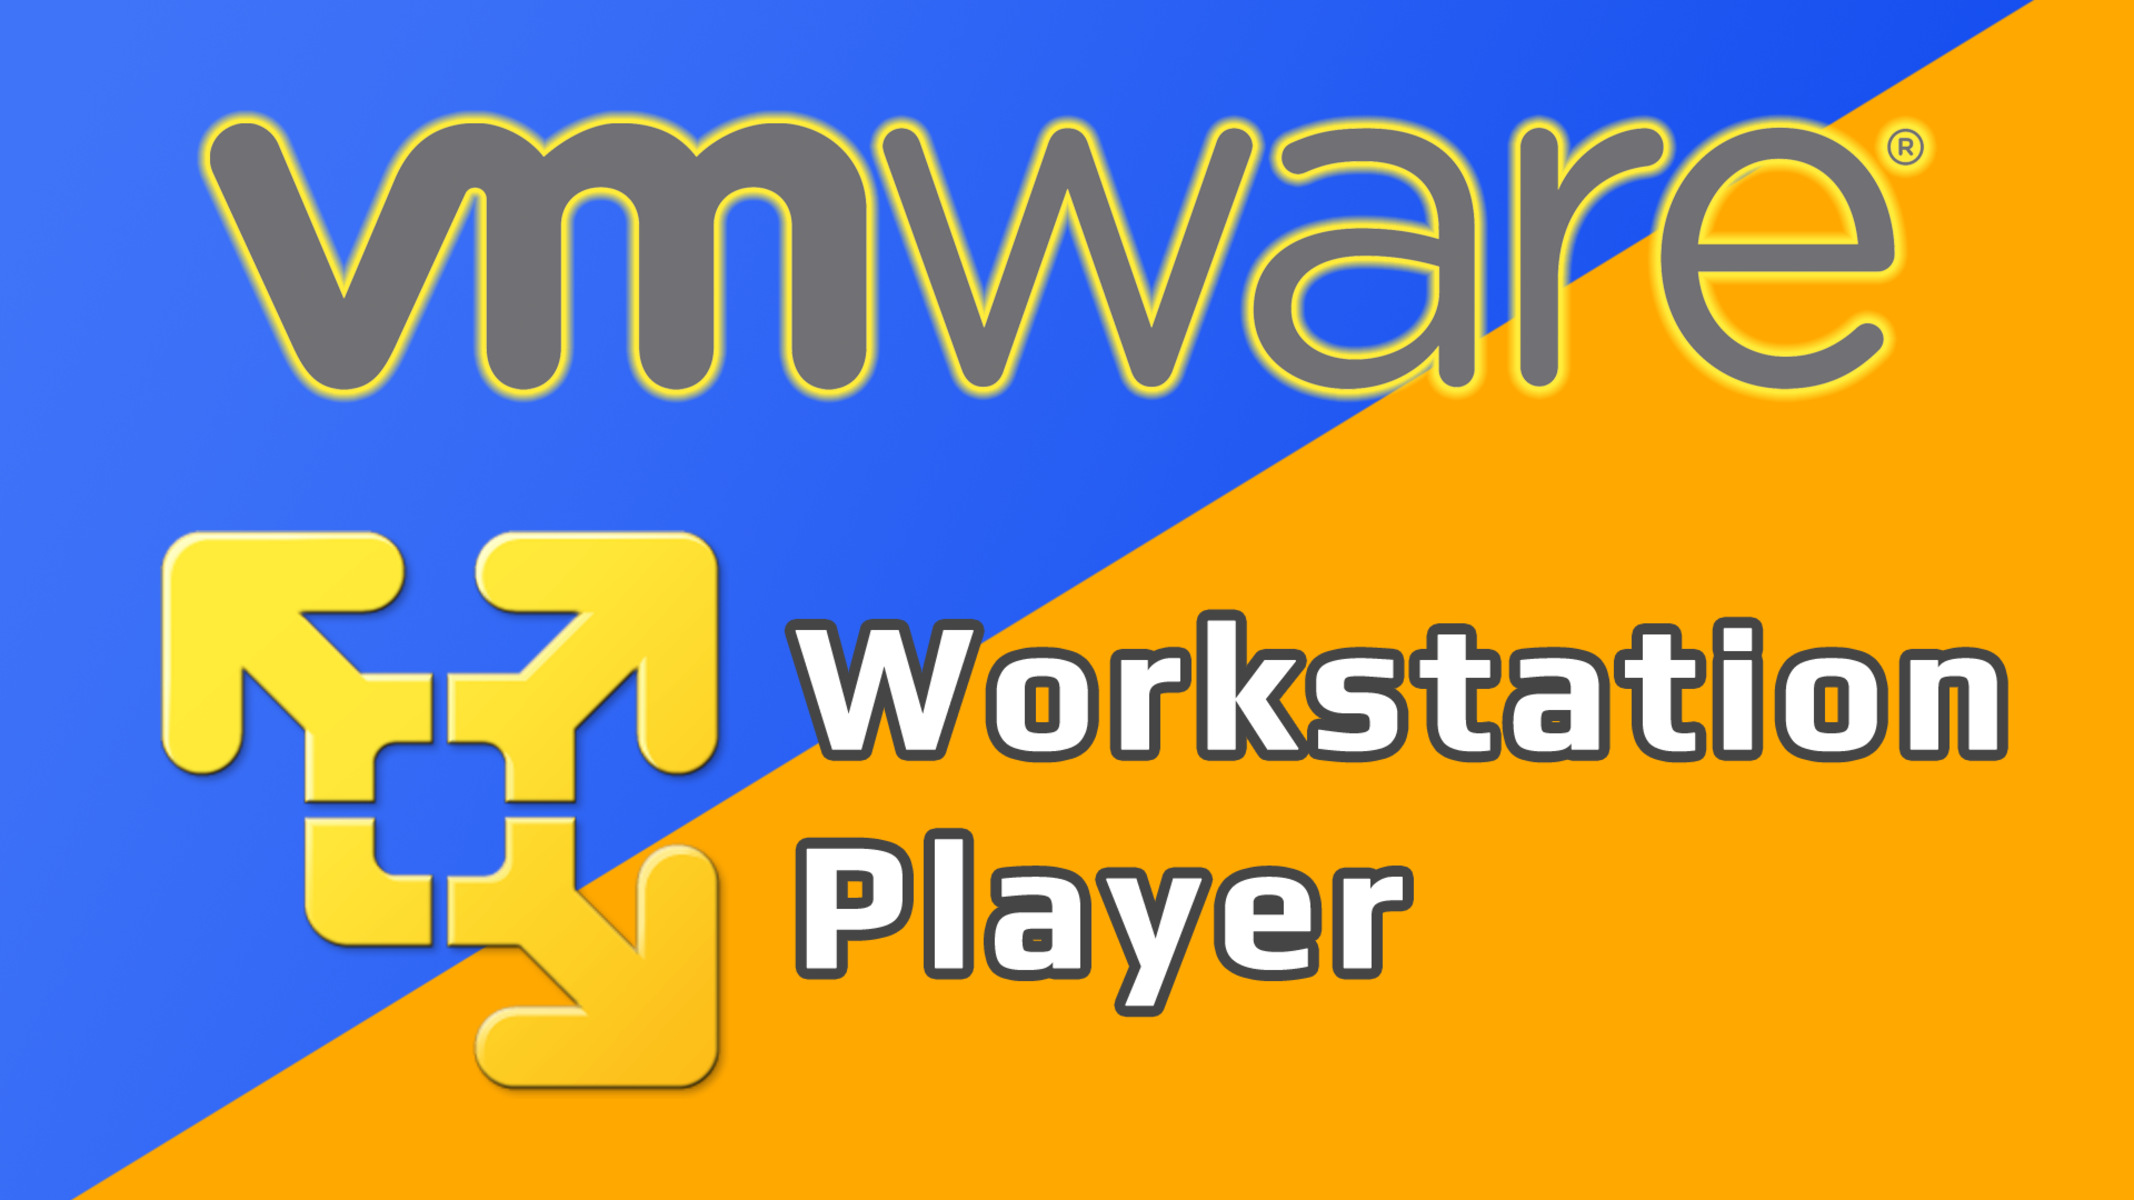 how-to-create-a-virtual-machine-using-vmware-workstation-12-player